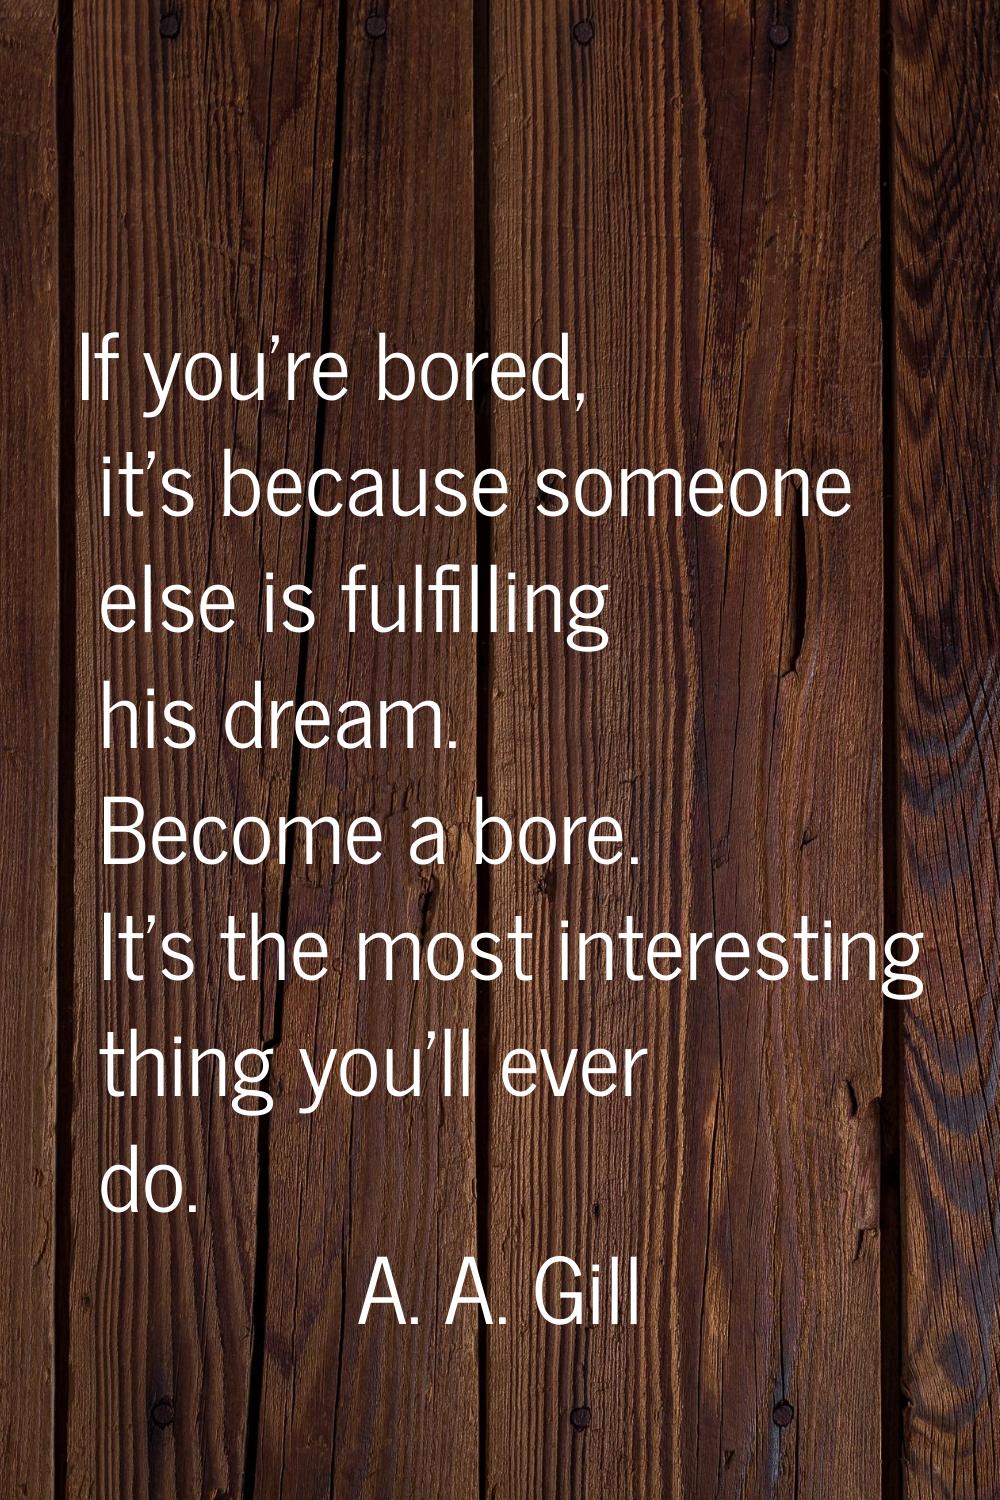 If you're bored, it's because someone else is fulfilling his dream. Become a bore. It's the most in